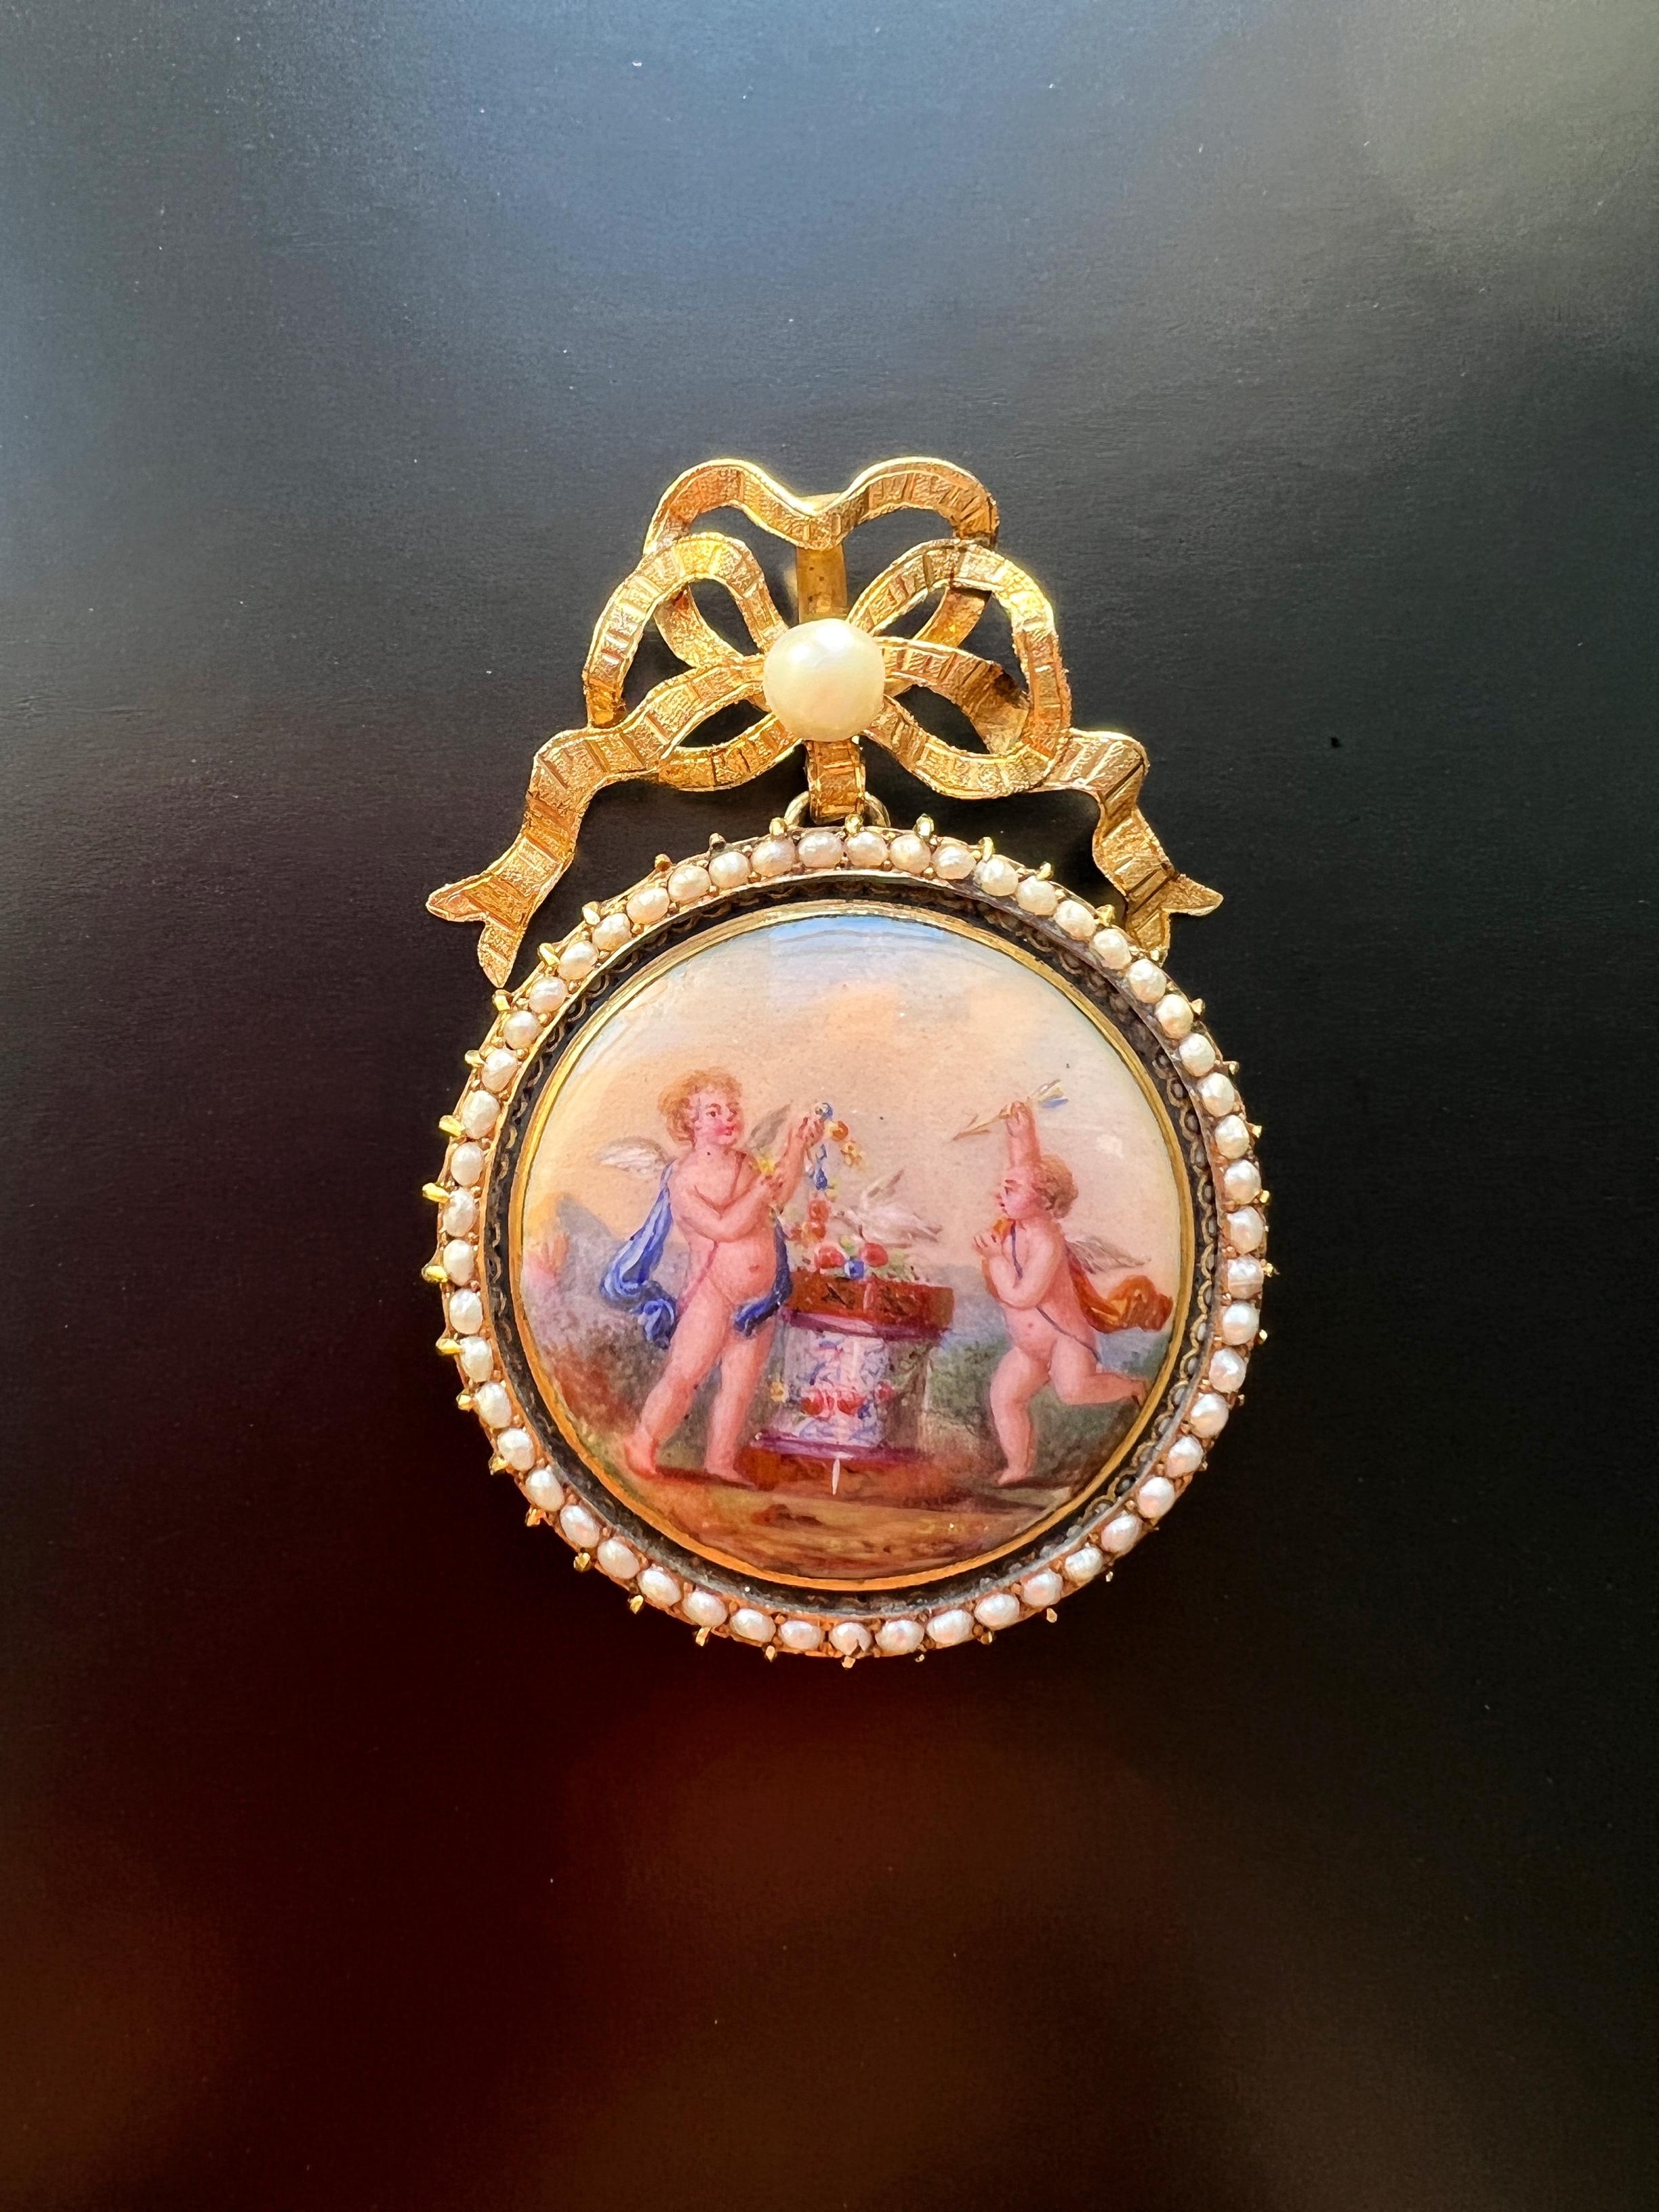 Holding this magnificent pendant in hand, we realized that the art of the miniature painter, enameller, gem-setter and jewelry designer have come together to provide us a feast for the eyes. This very sentimental Victorian era cupid enameled pendant